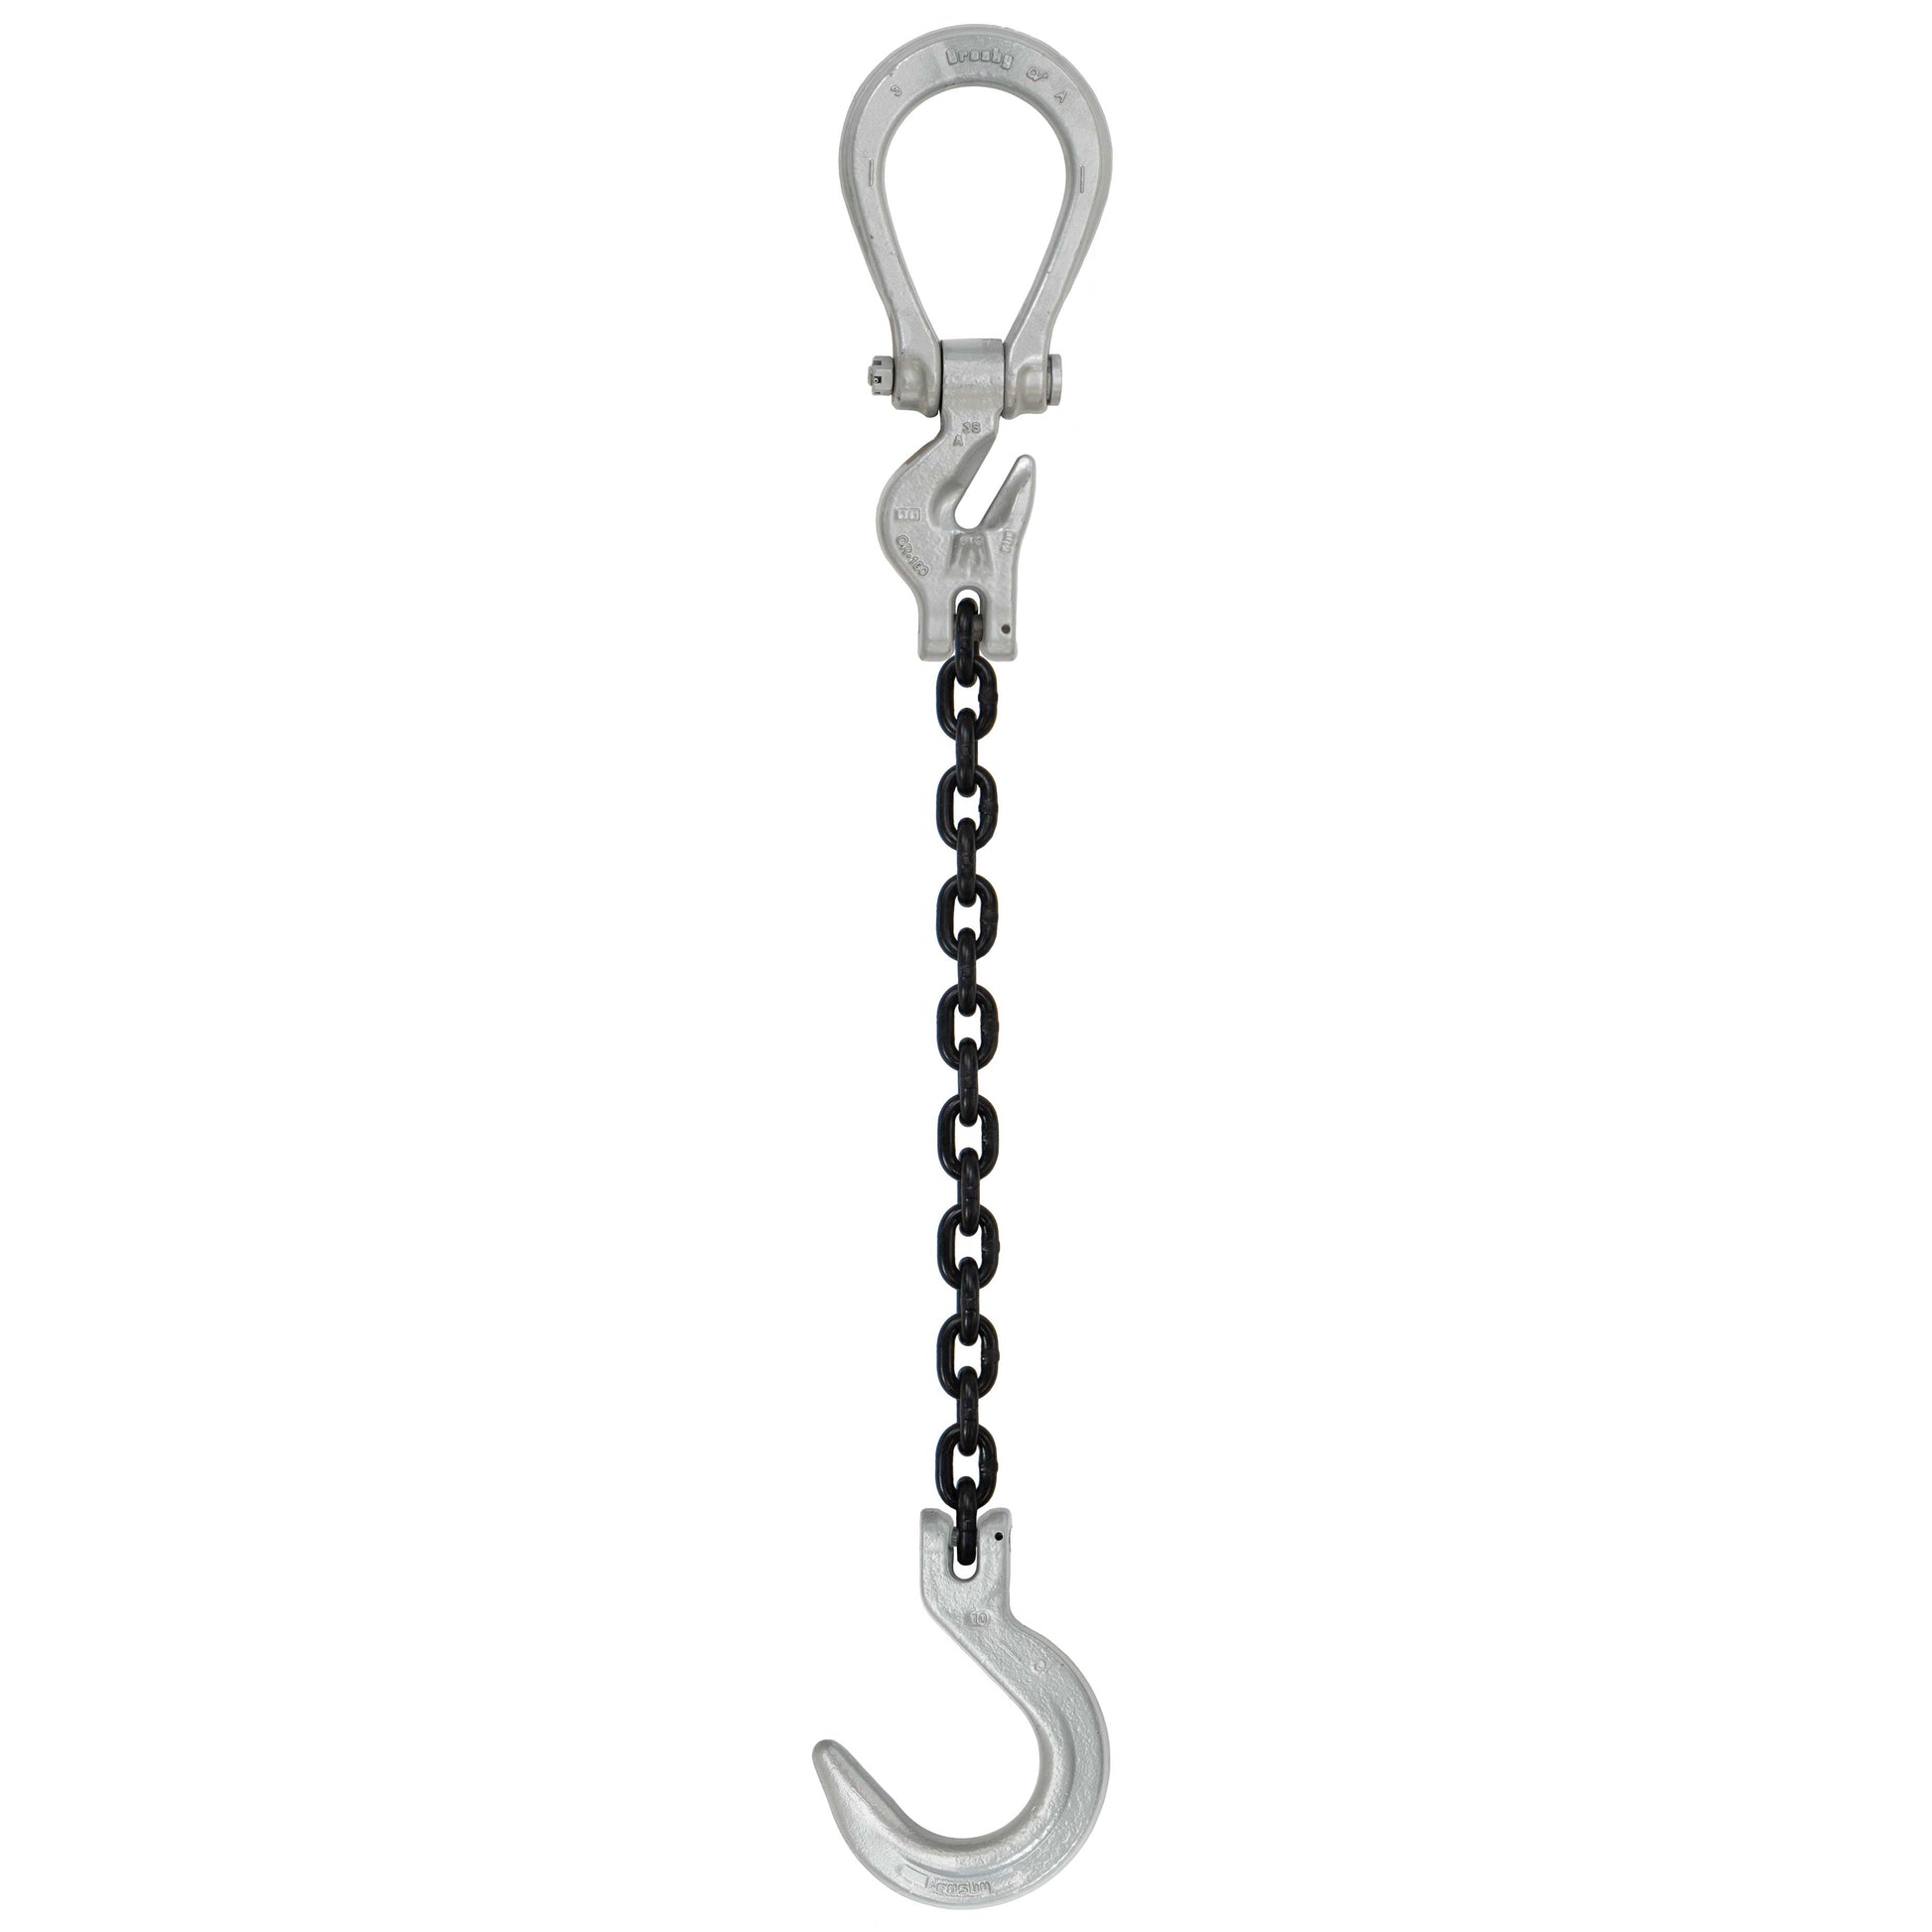 516 inch x 10 foot Domestic Adjustable Single Leg Chain Sling w Crosby Foundry Hook Grade 100 image 1 of 2